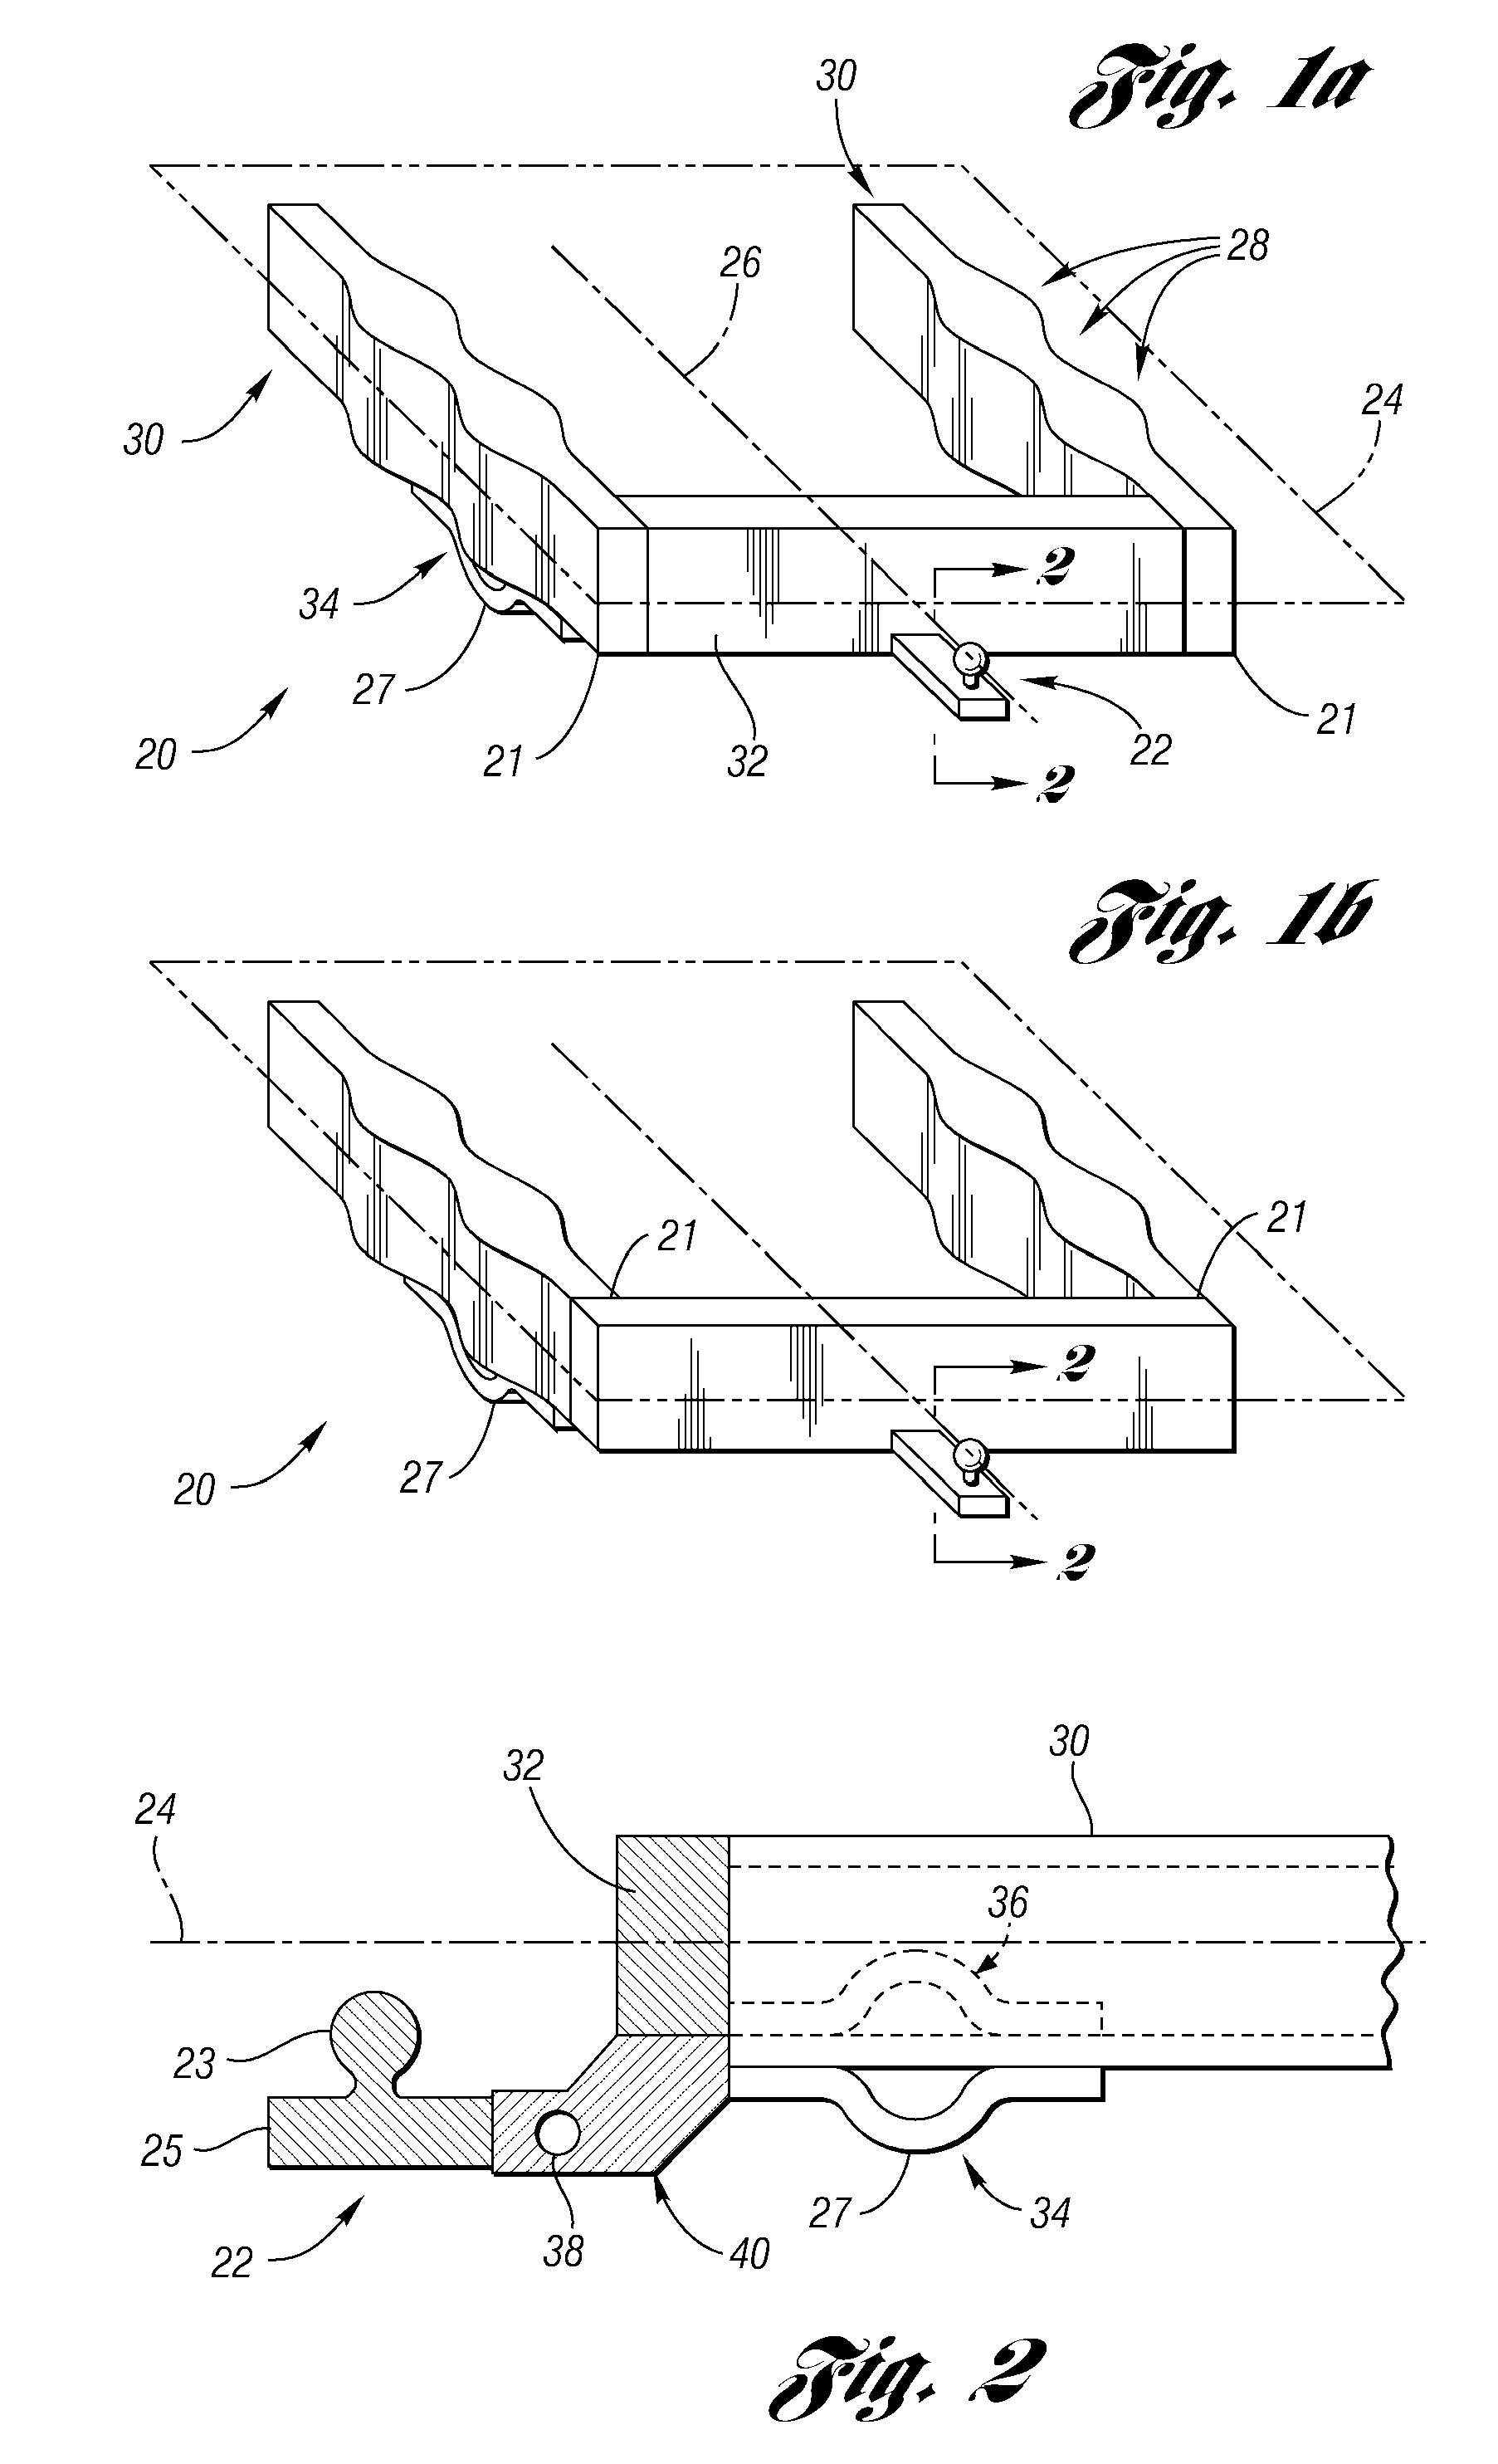 Rear vehicle subassembly having a towing hitch member